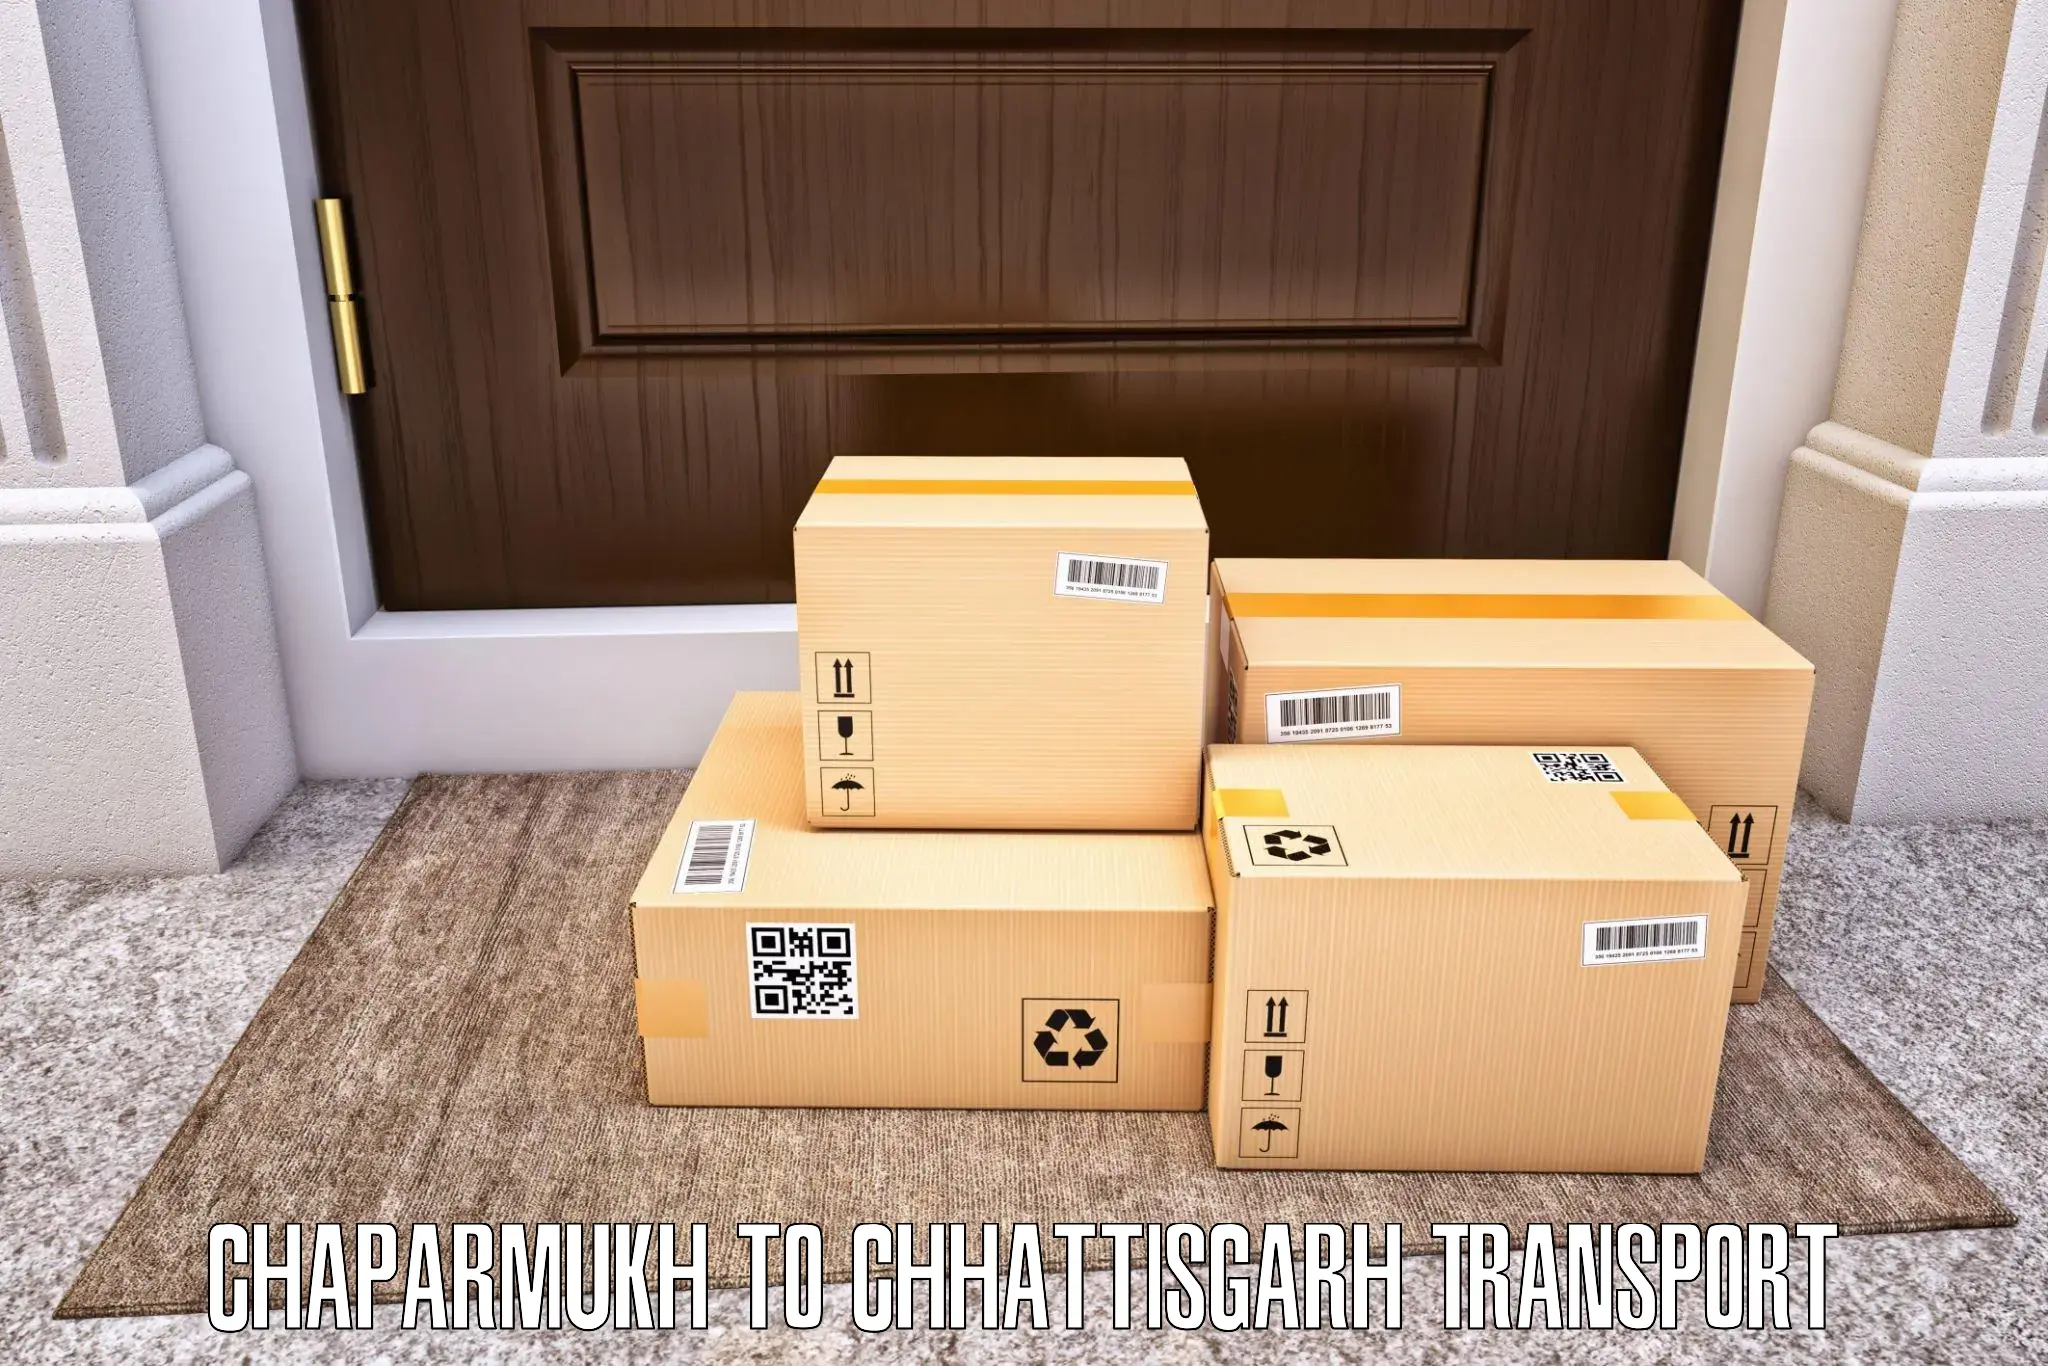 Material transport services Chaparmukh to Surajpur